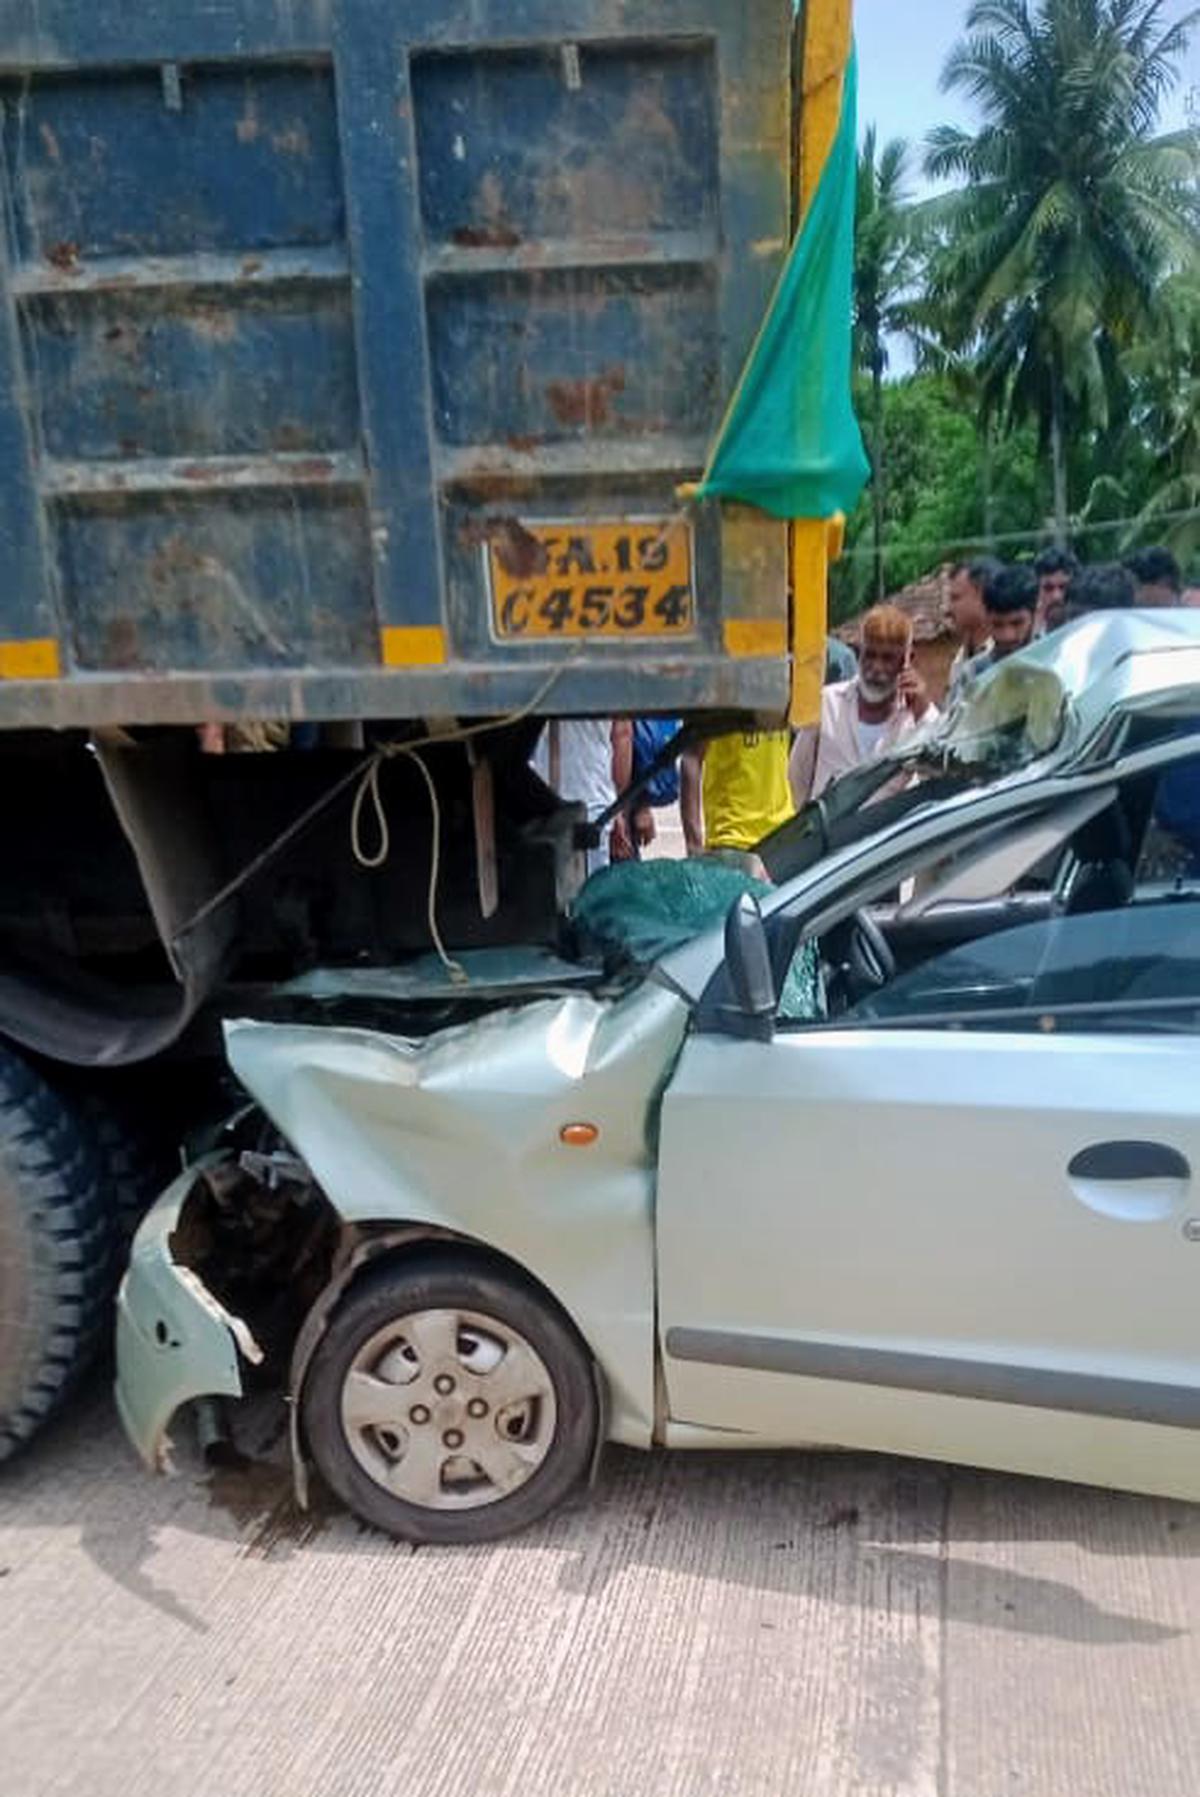 The car, on its way to Mangaluru, was trailing the tipper lorry that was on its way from Belman near Padubidri to the Baikampady Industrial Area in Mangaluru, when the incident occurred near Kannagar. 